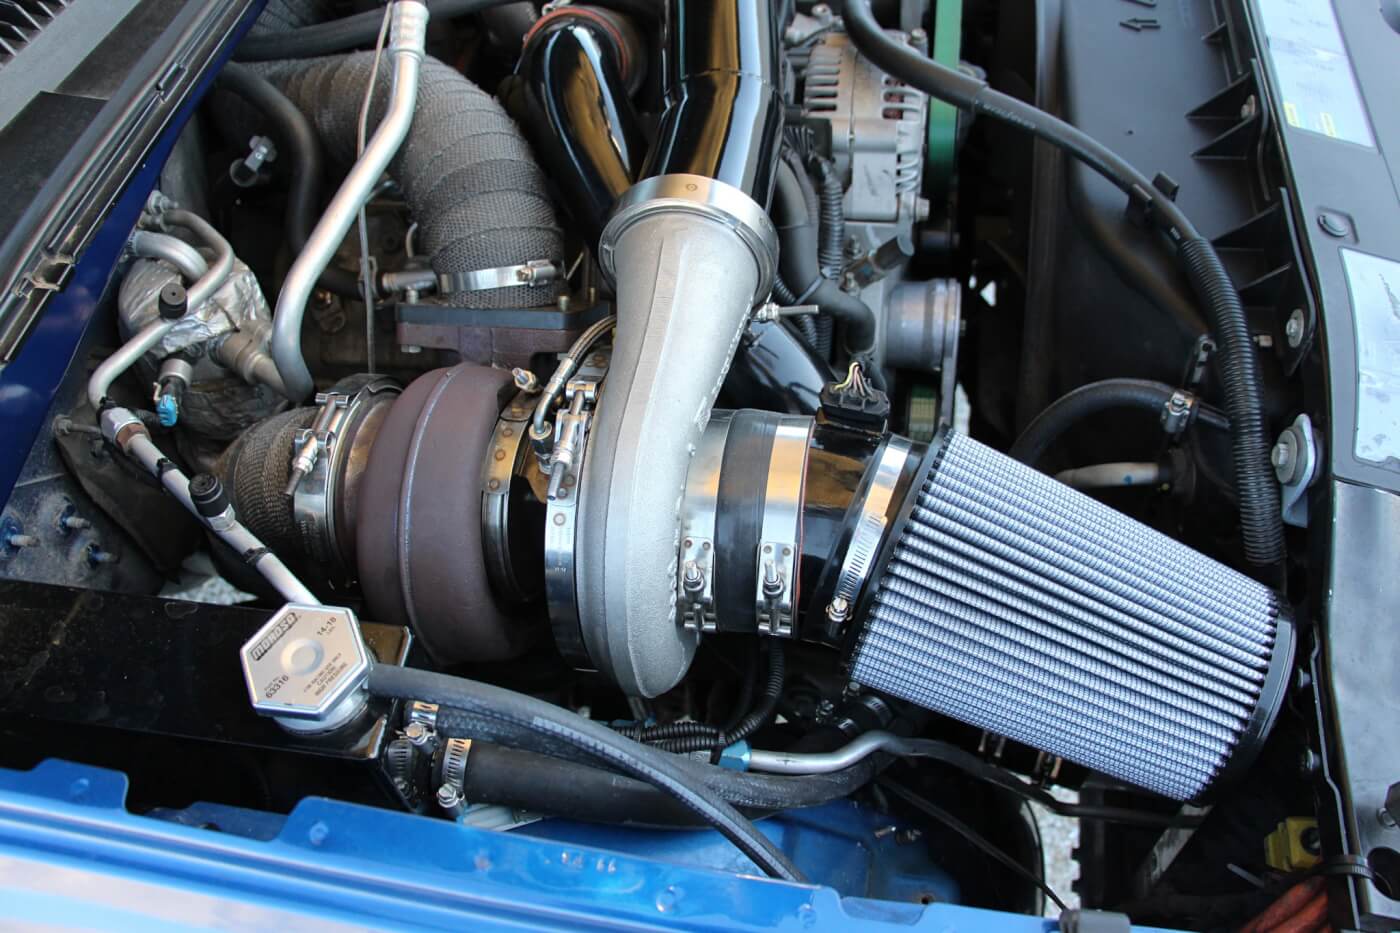 Kicking the passenger side battery out of its original location is this billet S480. It features the common 96mm turbine wheel, T6 flange, and 1.32 A/R turbine housing combination. In conjunction with the billet S366, the compound setup produces between 70-75 psi of boost on the street.